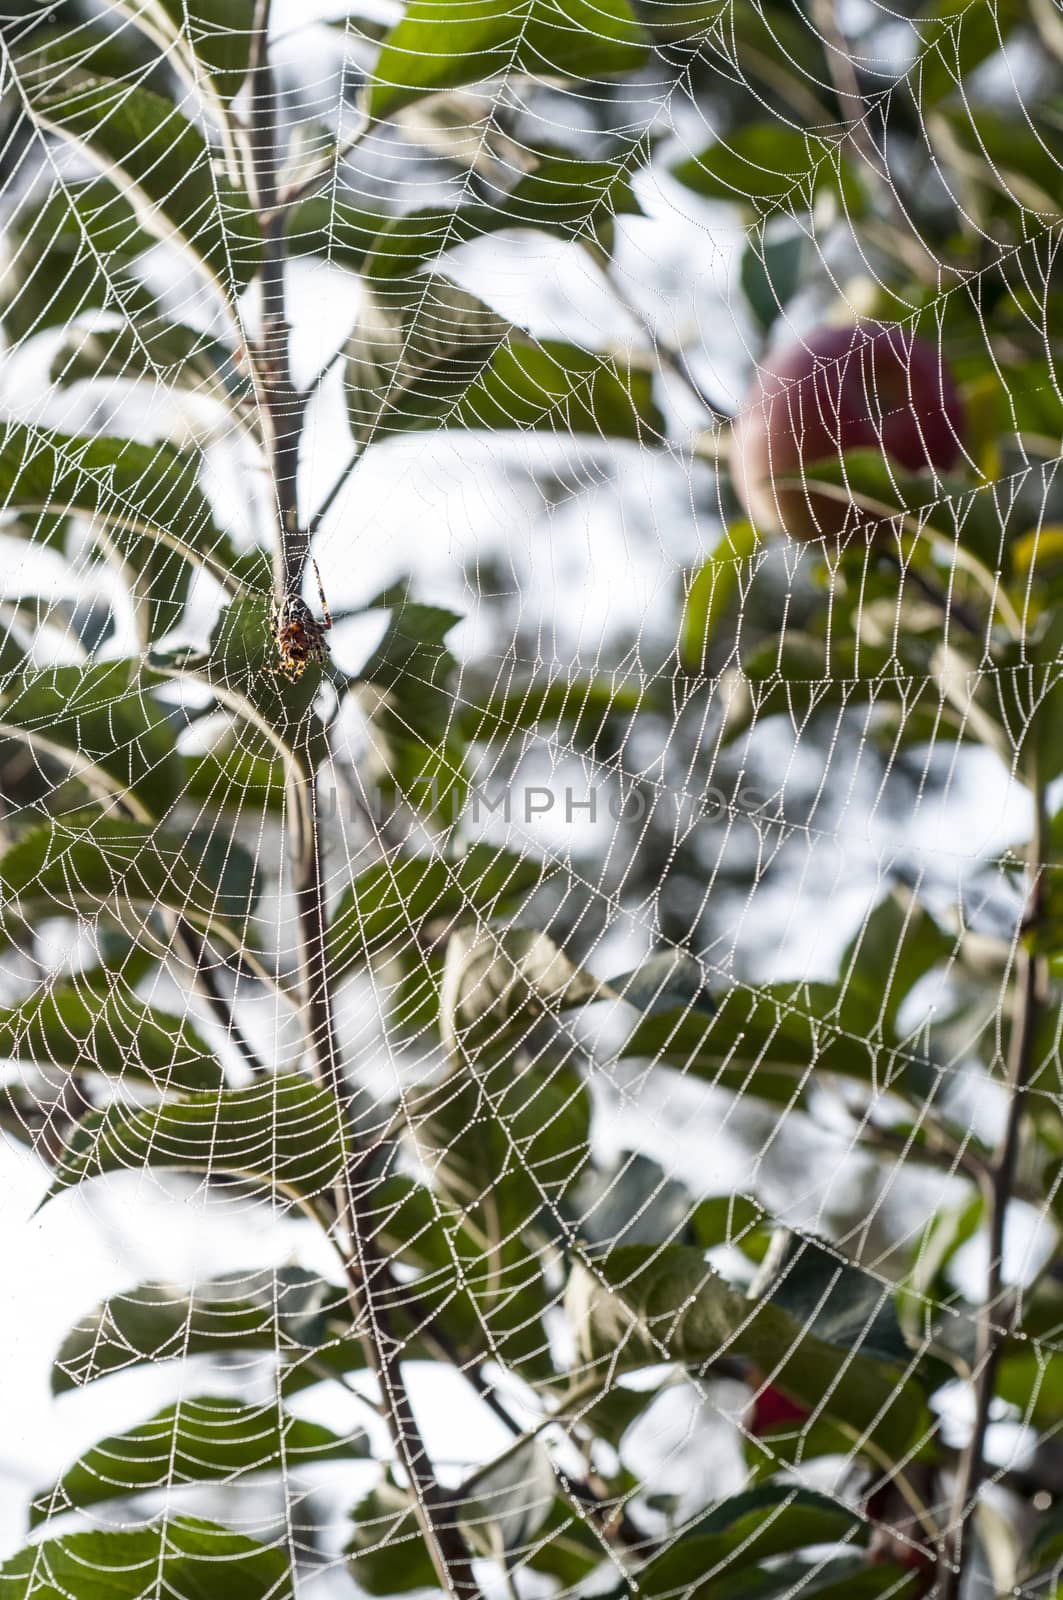 Spider hanging in center of web strung from trees with dew by Njean